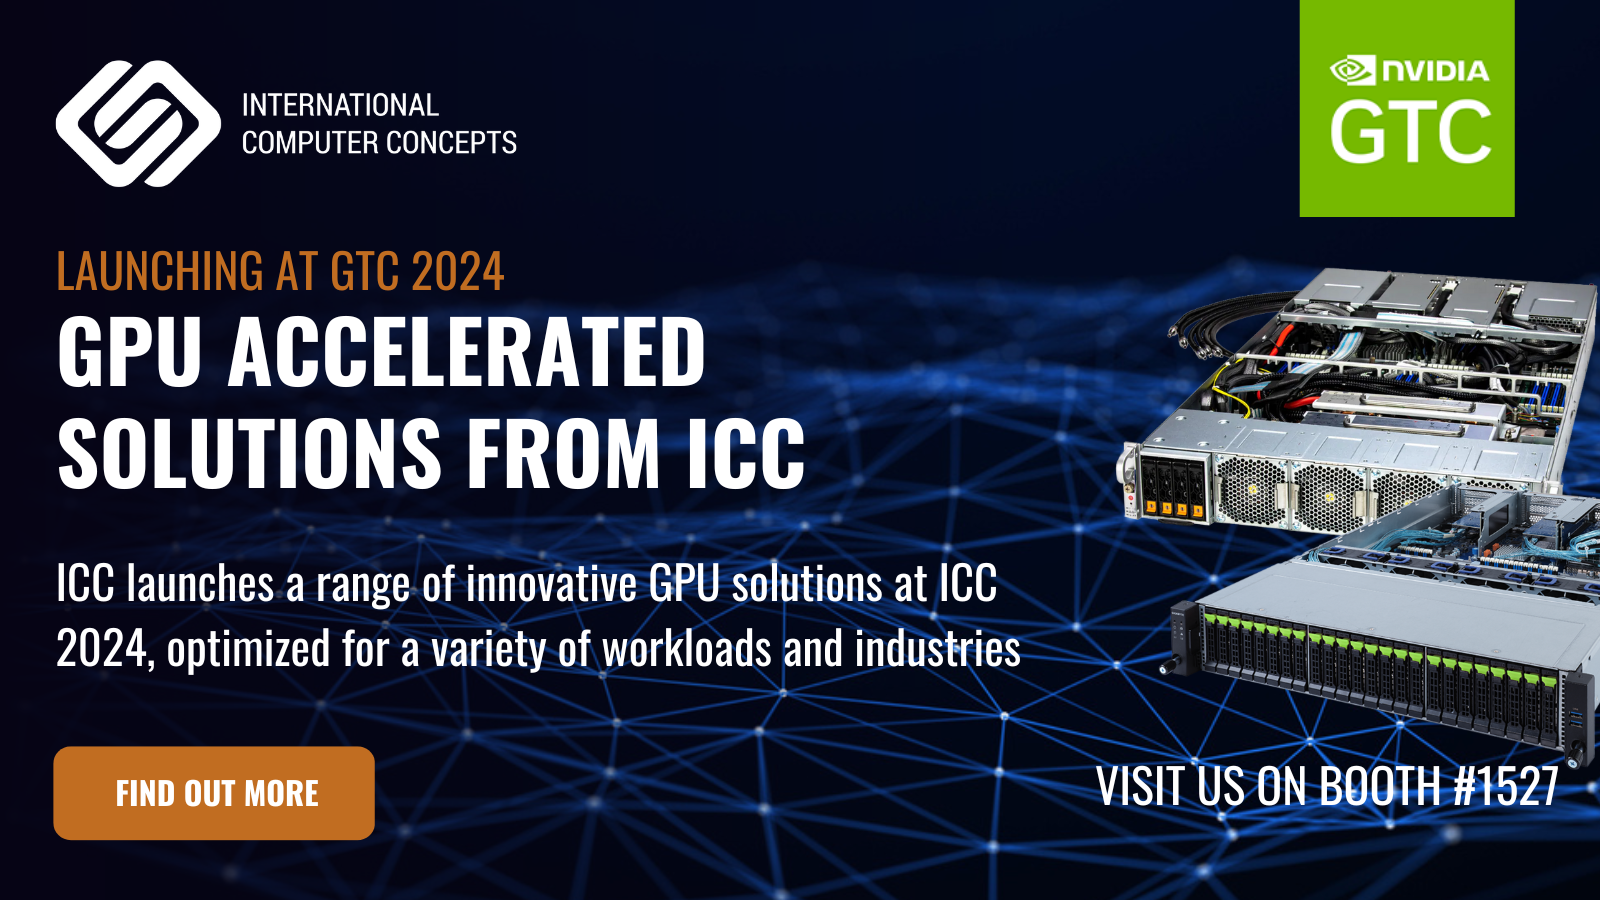 ICC Showcases Range of GPU Accelerated Solution at GTC 2024